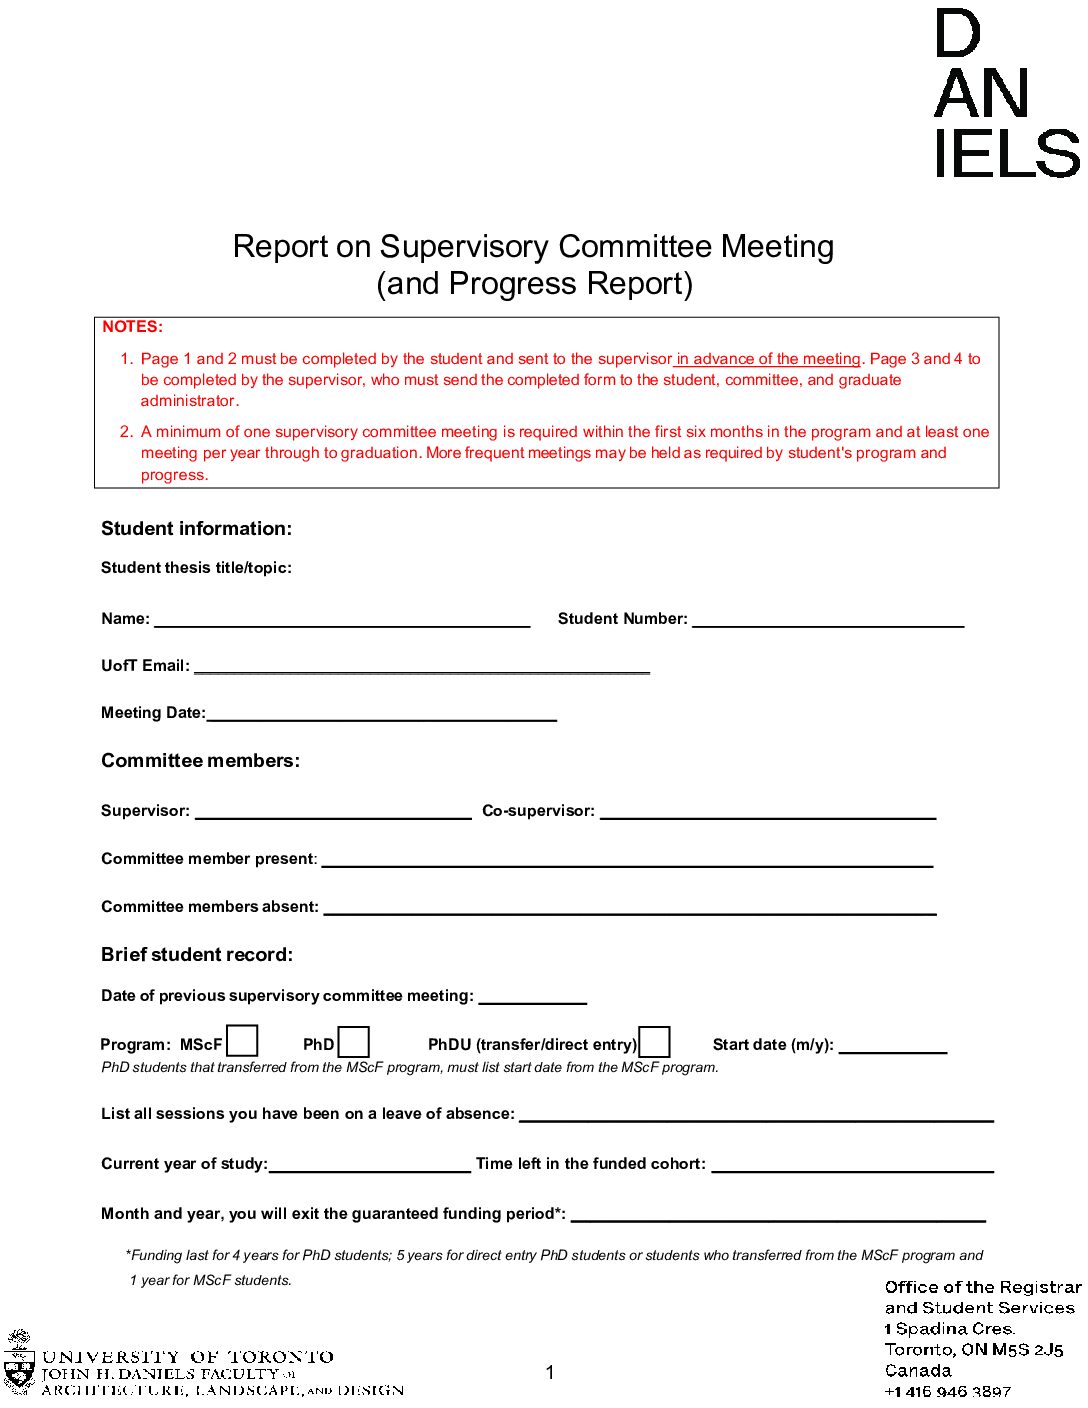 Supervisory-Committee-Meeting-Form-Template